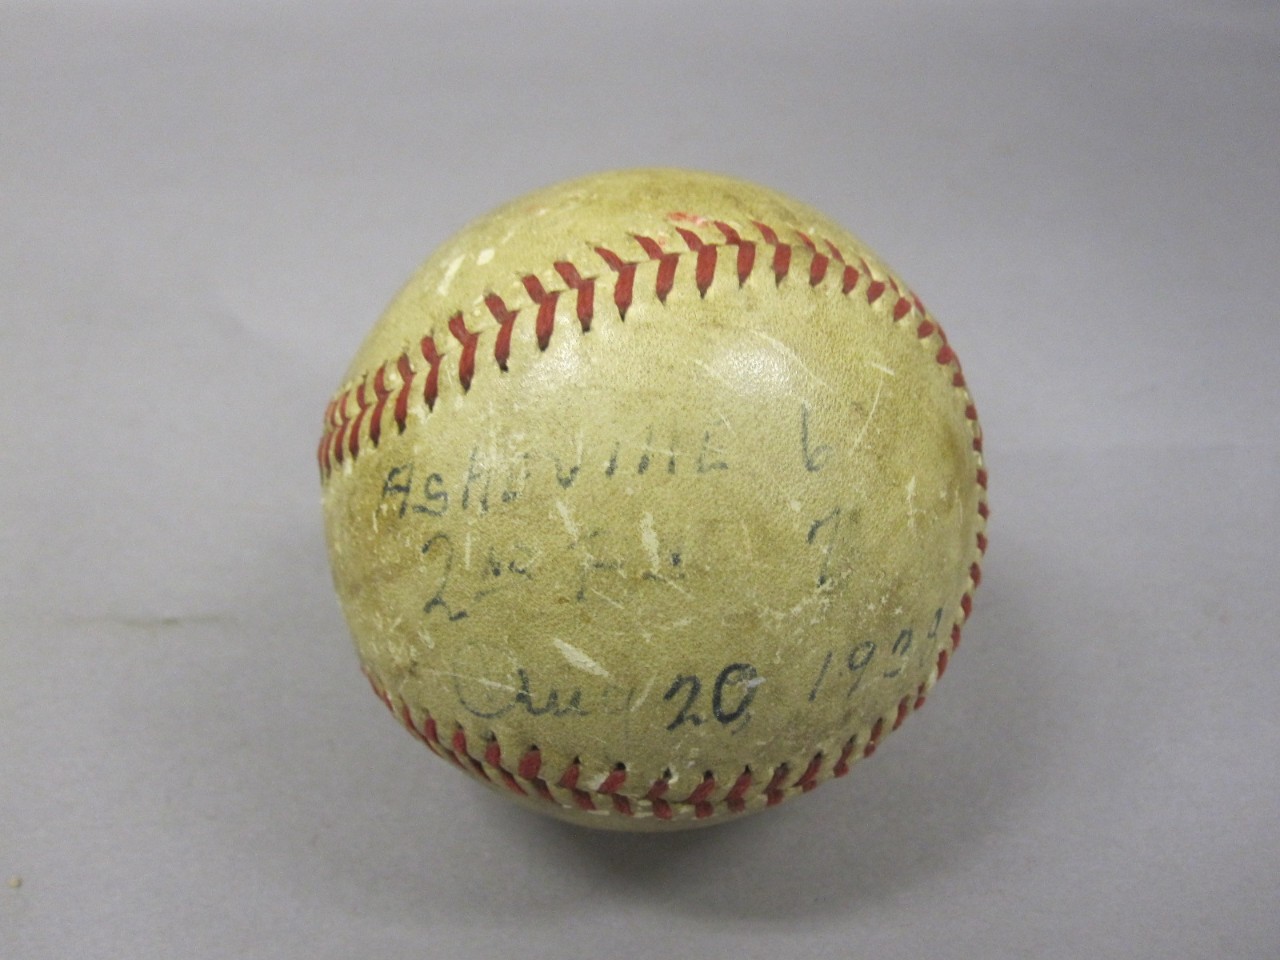 White baseball with red stitching used in game signed with score and date